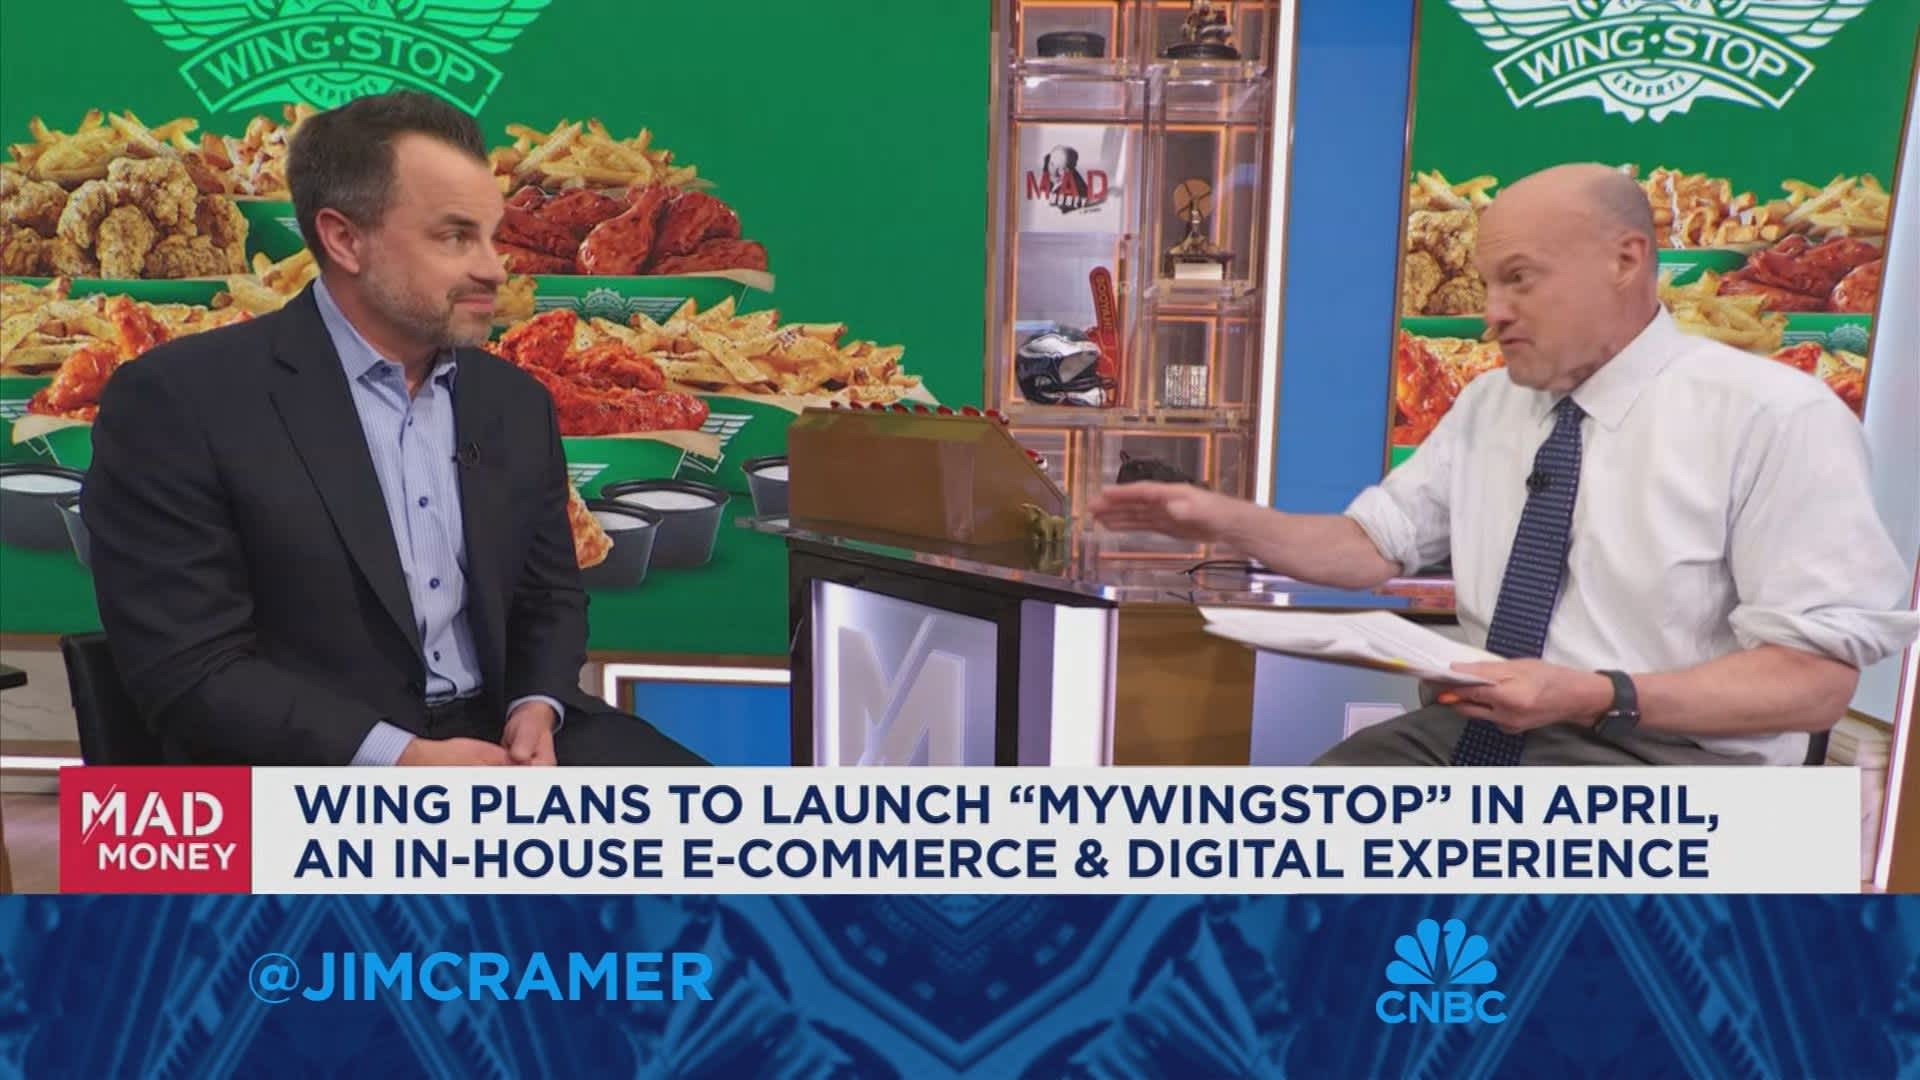 Wingstop CEO Michael Skipworth: There’s a ton of runway for us and our ad strategy is working [Video]